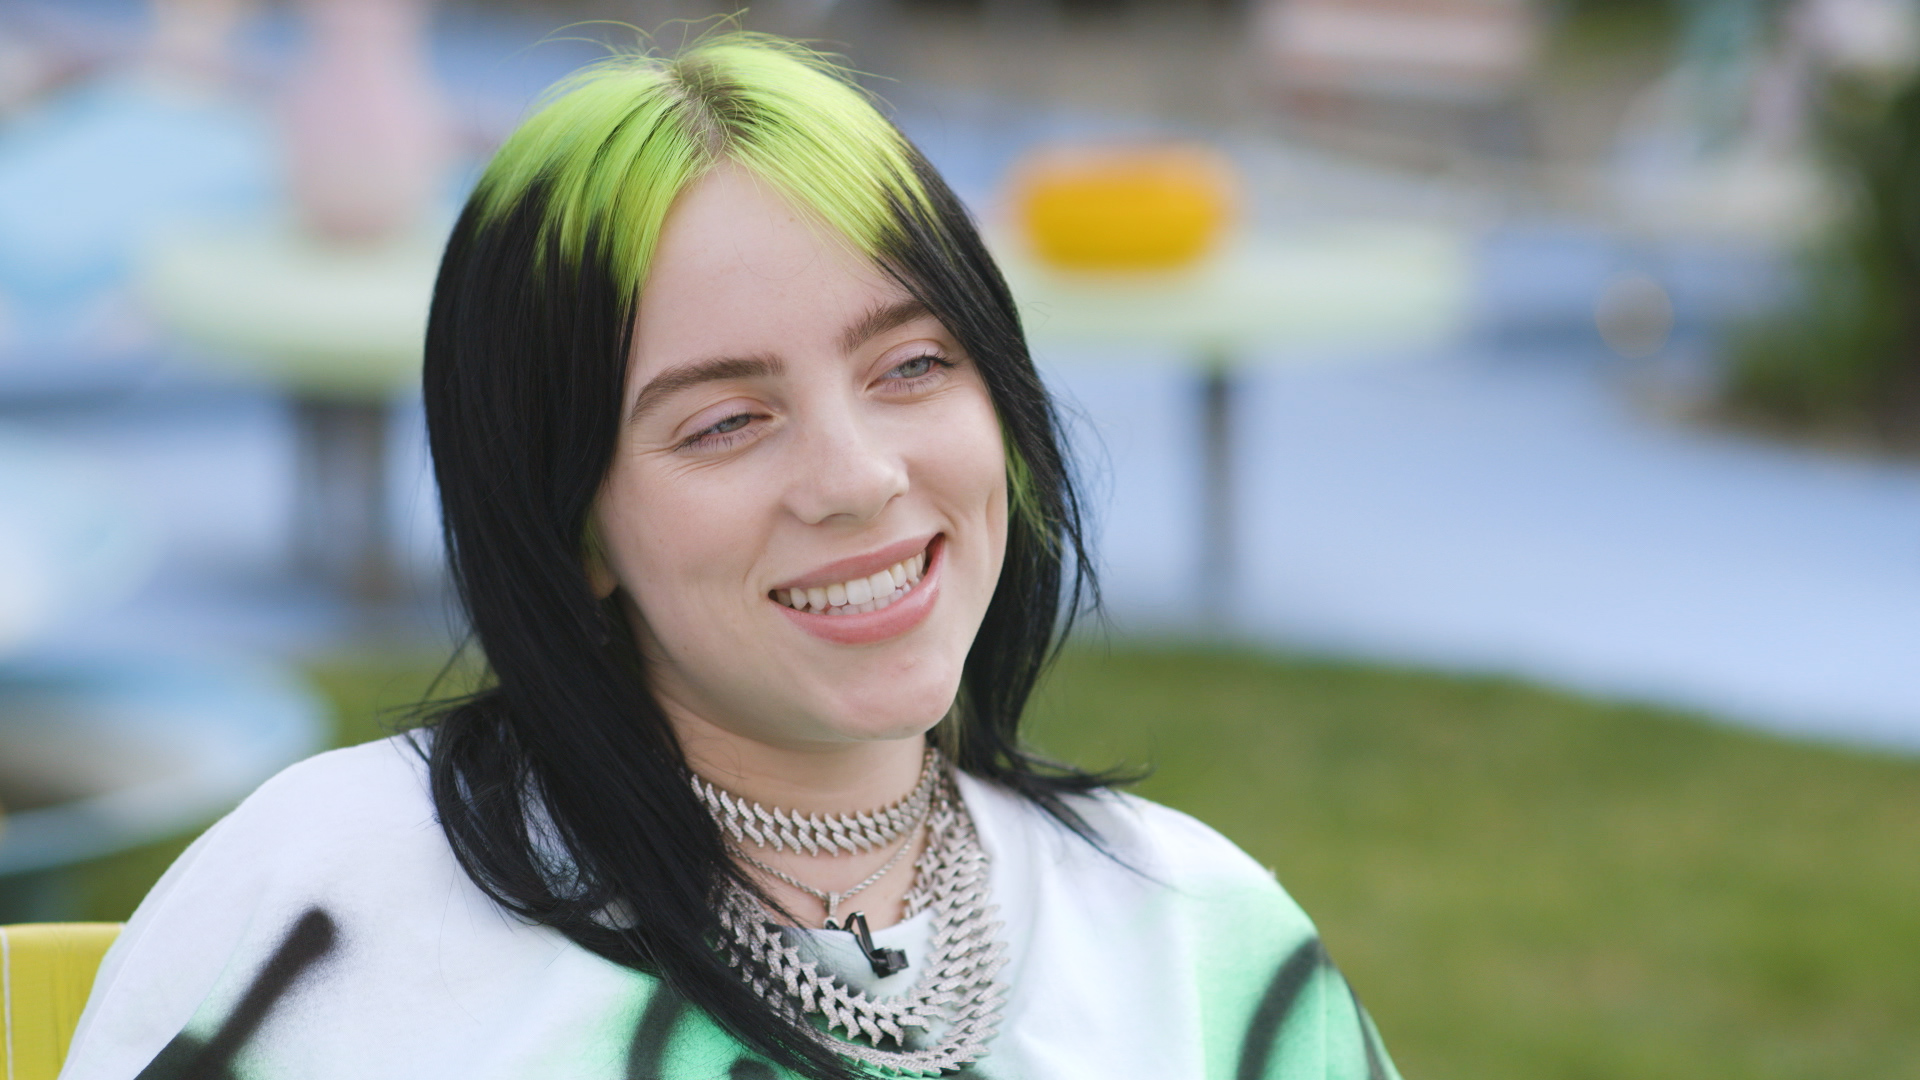 Billie Eilish Plastic Surgery – Before and After. Lips, Nose Job, Body Measurements, and More!